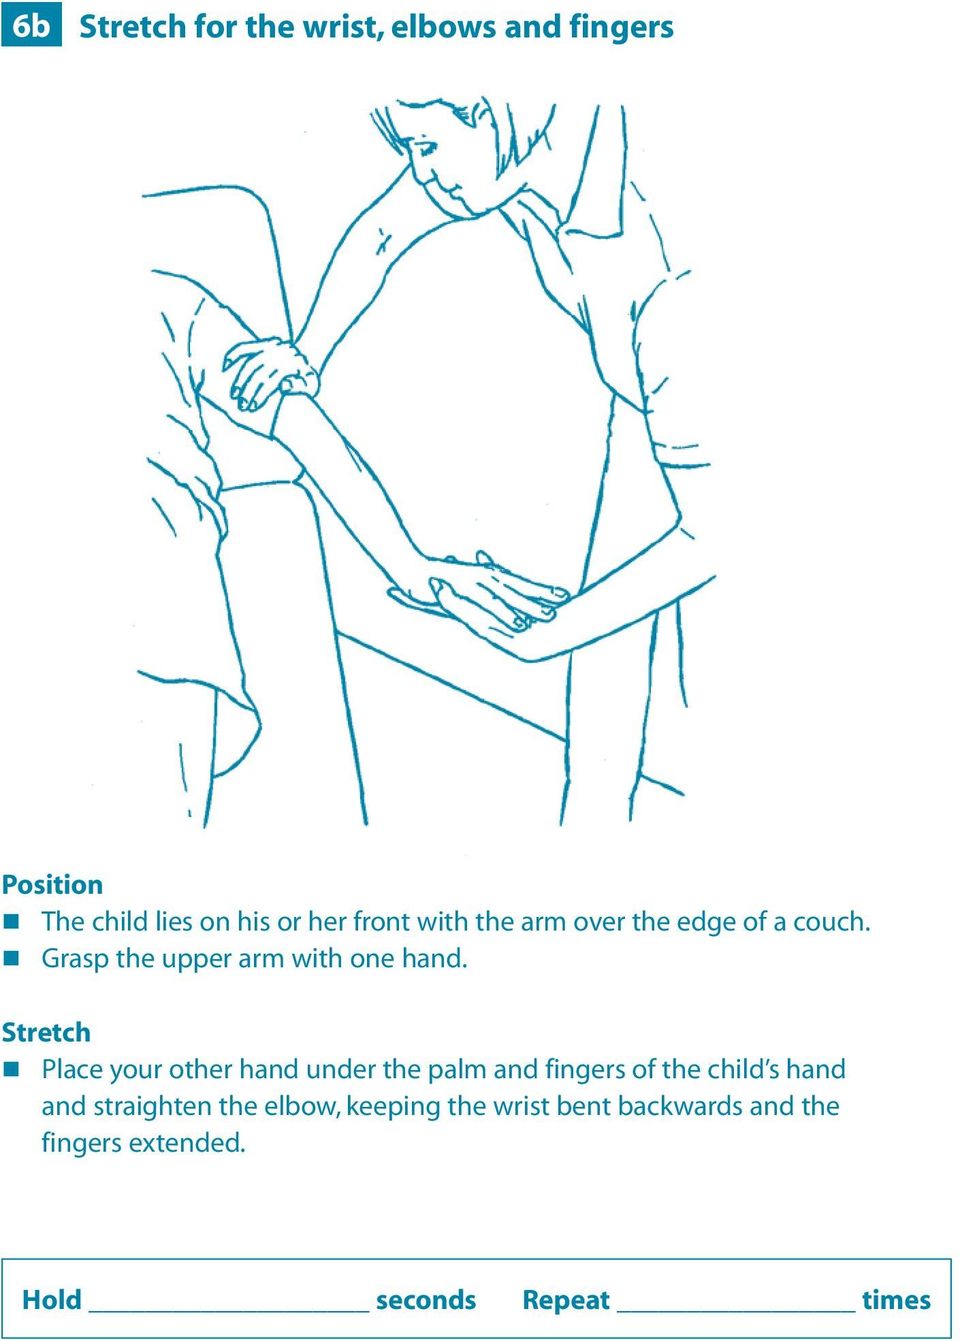 Place your other hand under the palm and fingers of the child s hand and